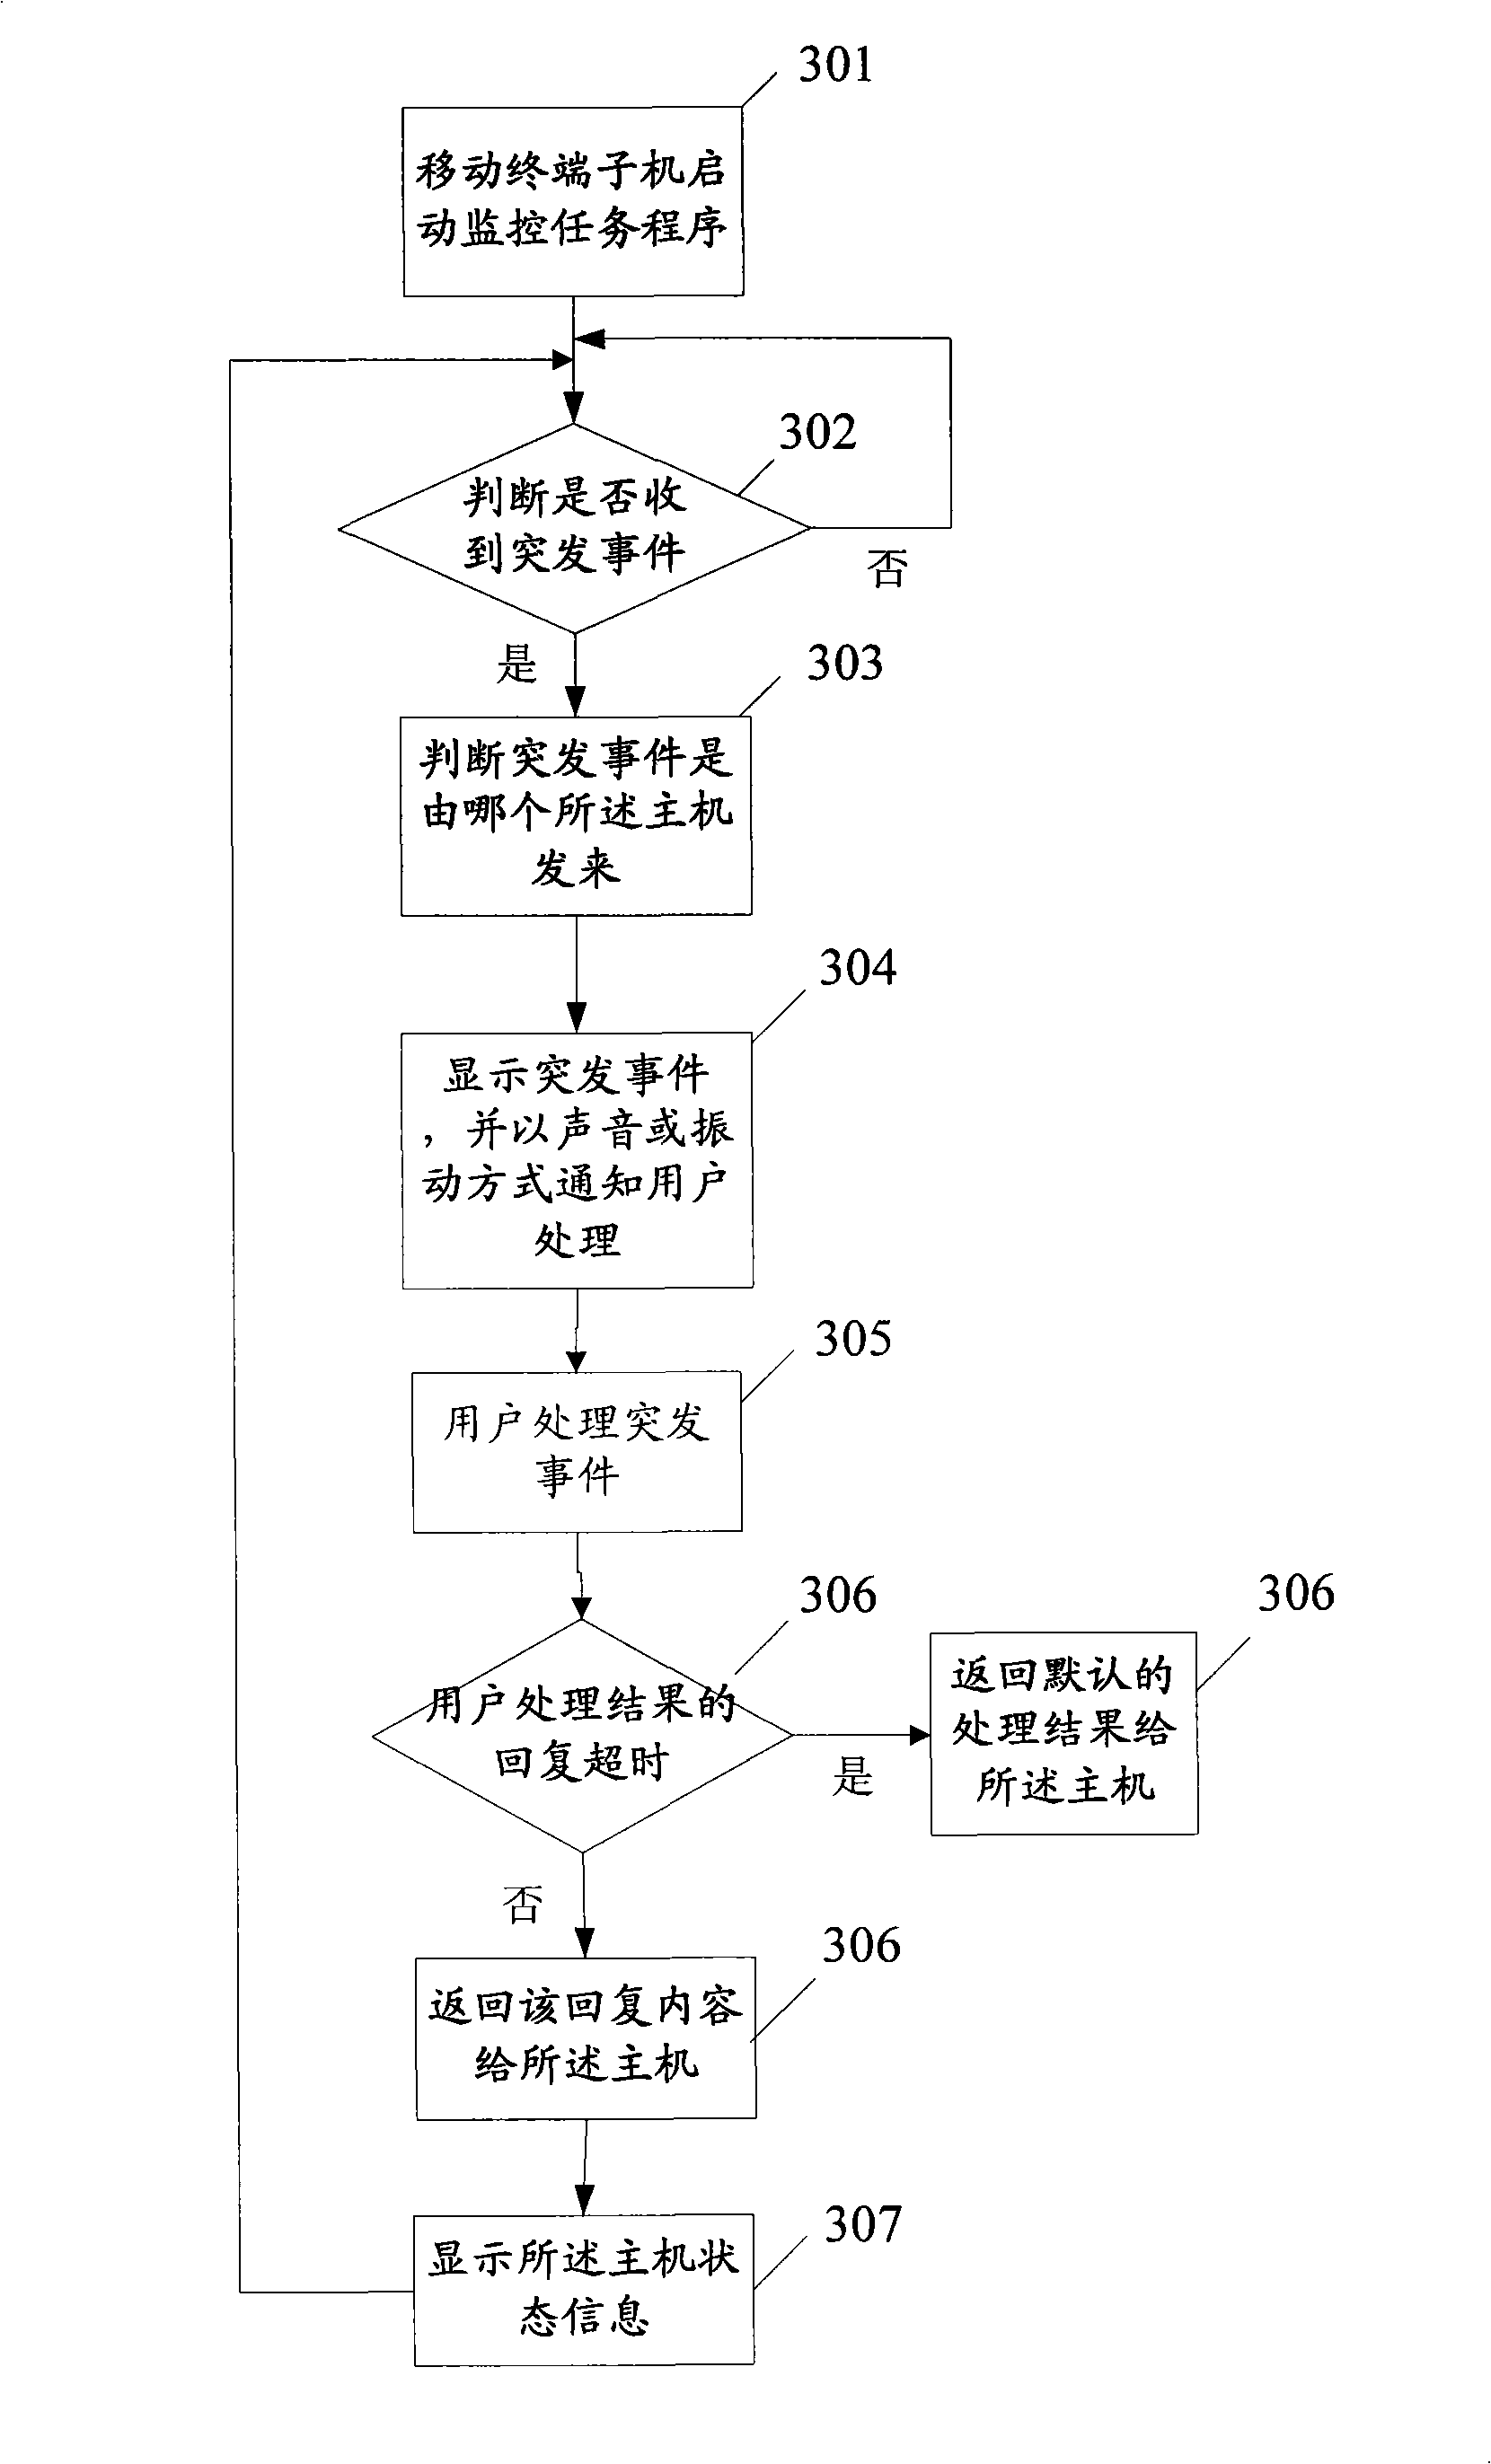 Method, system and device for monitoring multiple host by a single submachine